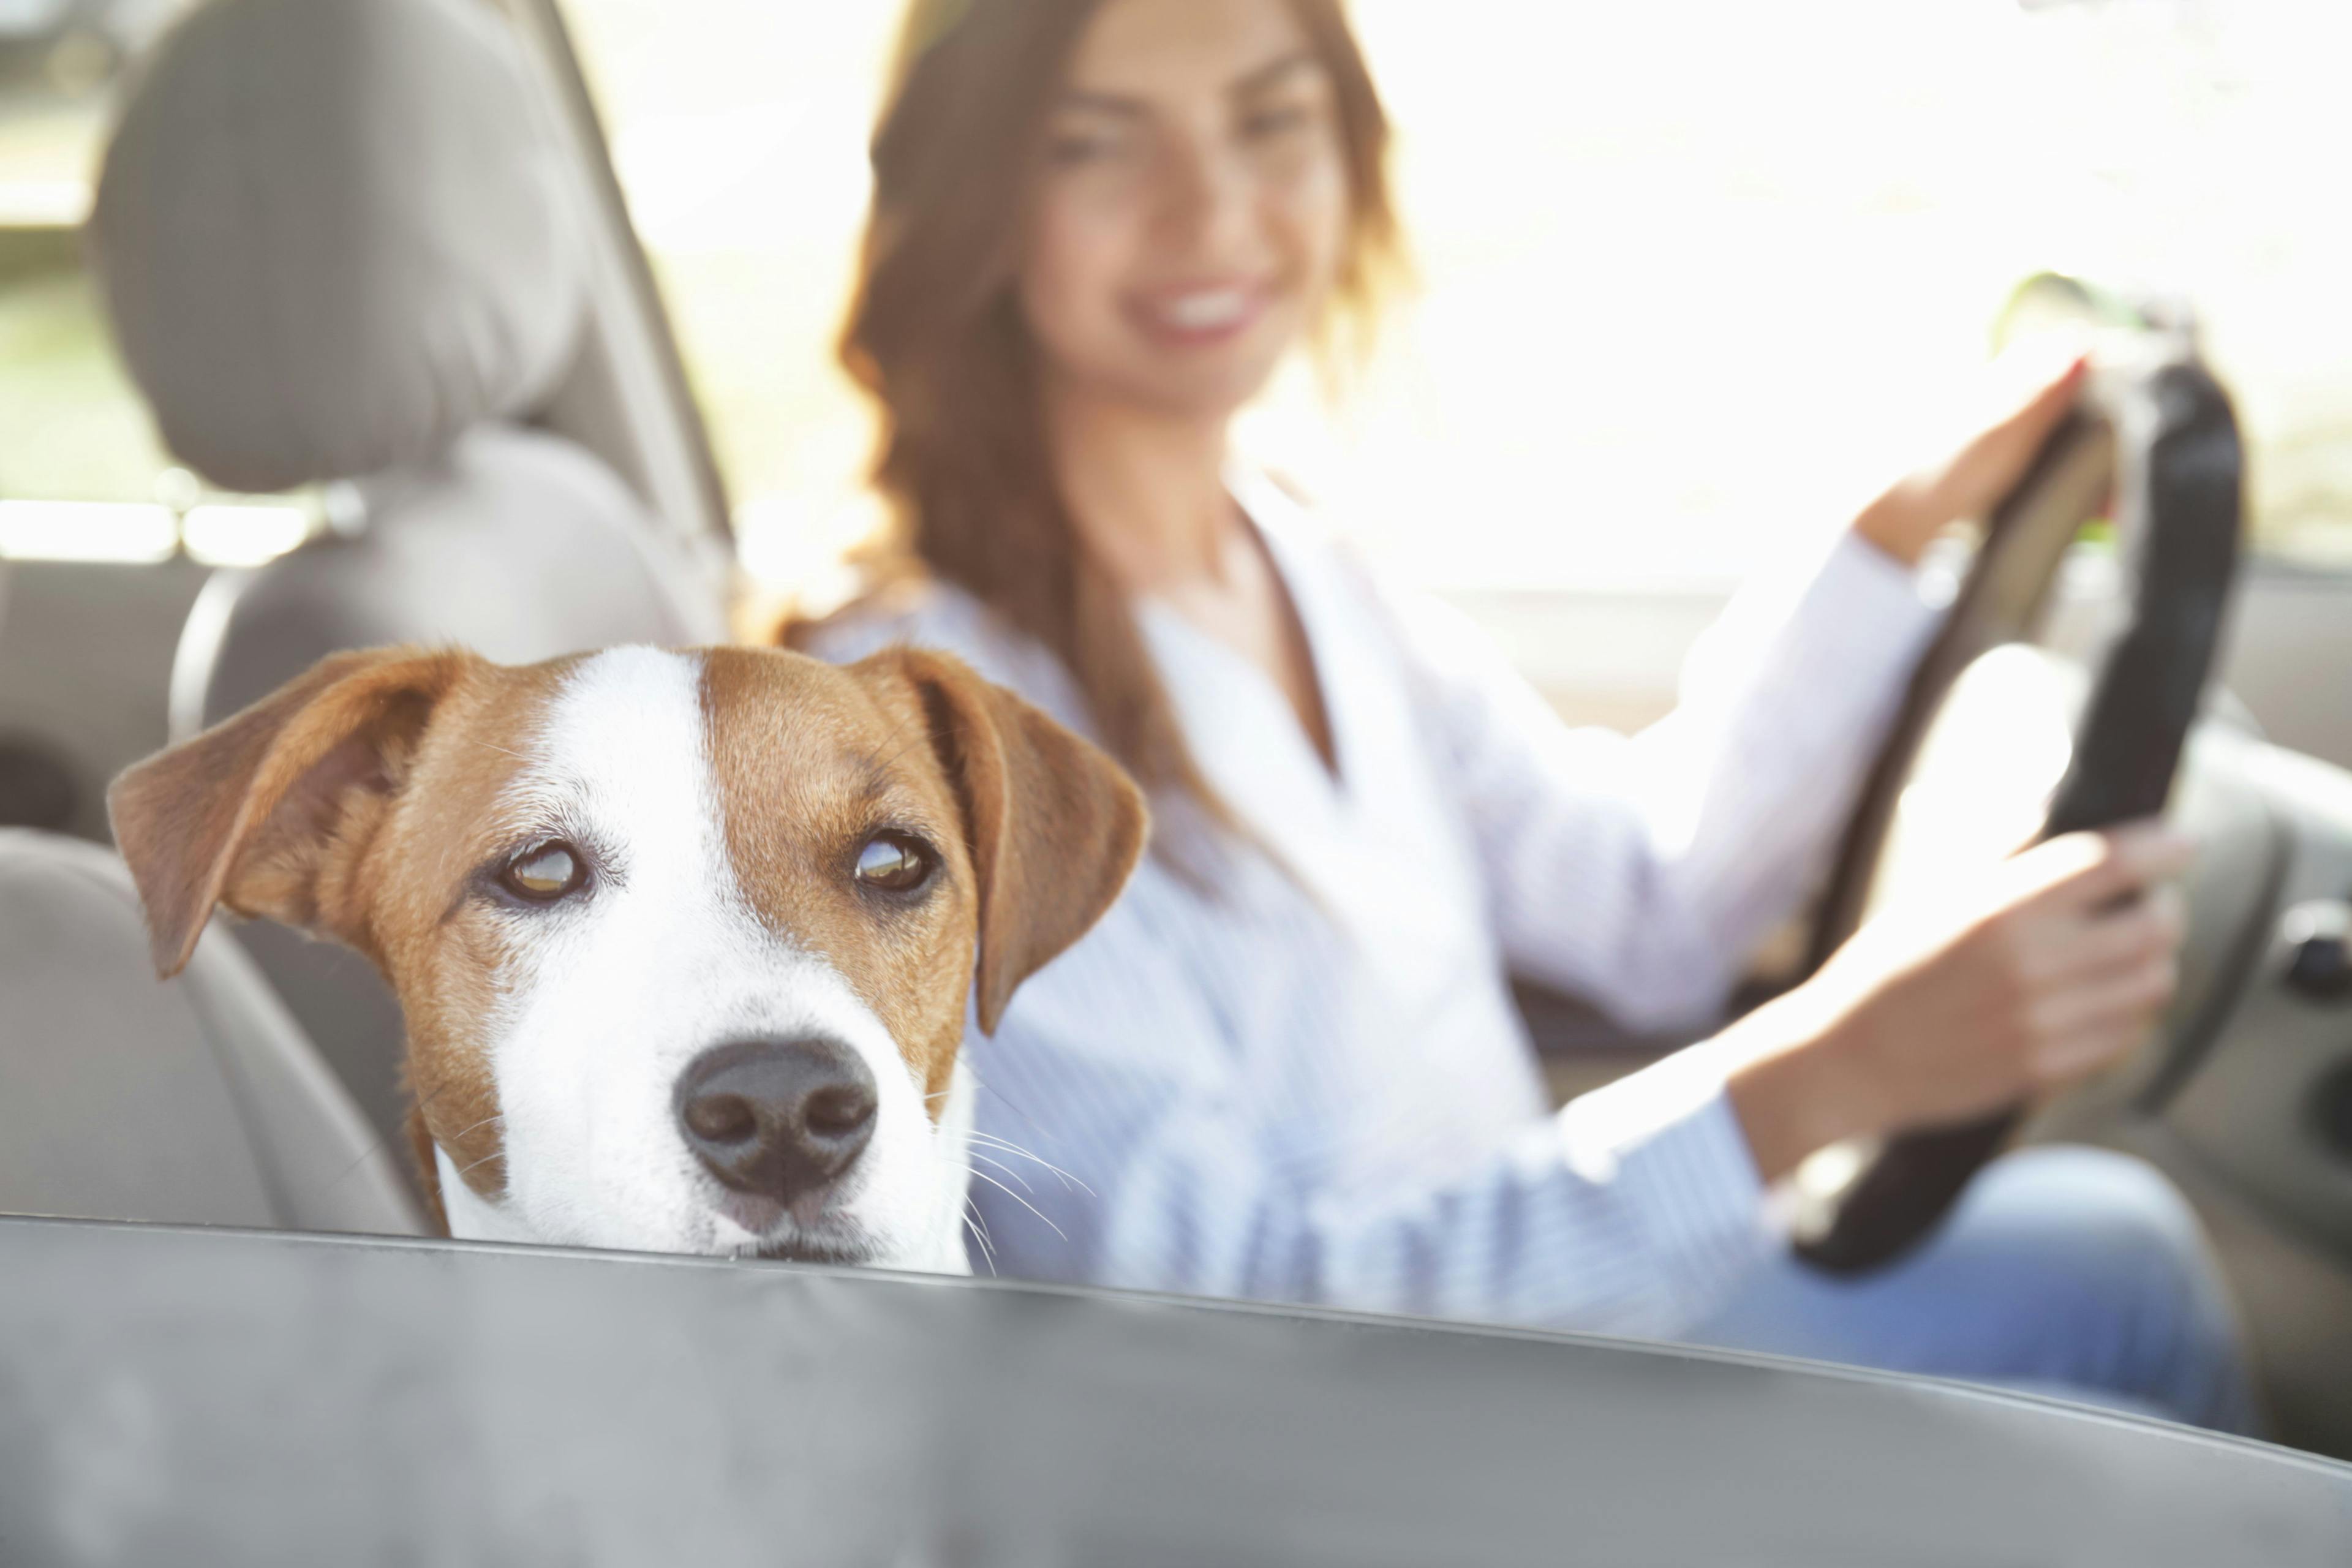 Curbside check-in sets a new standard in veterinary medicine